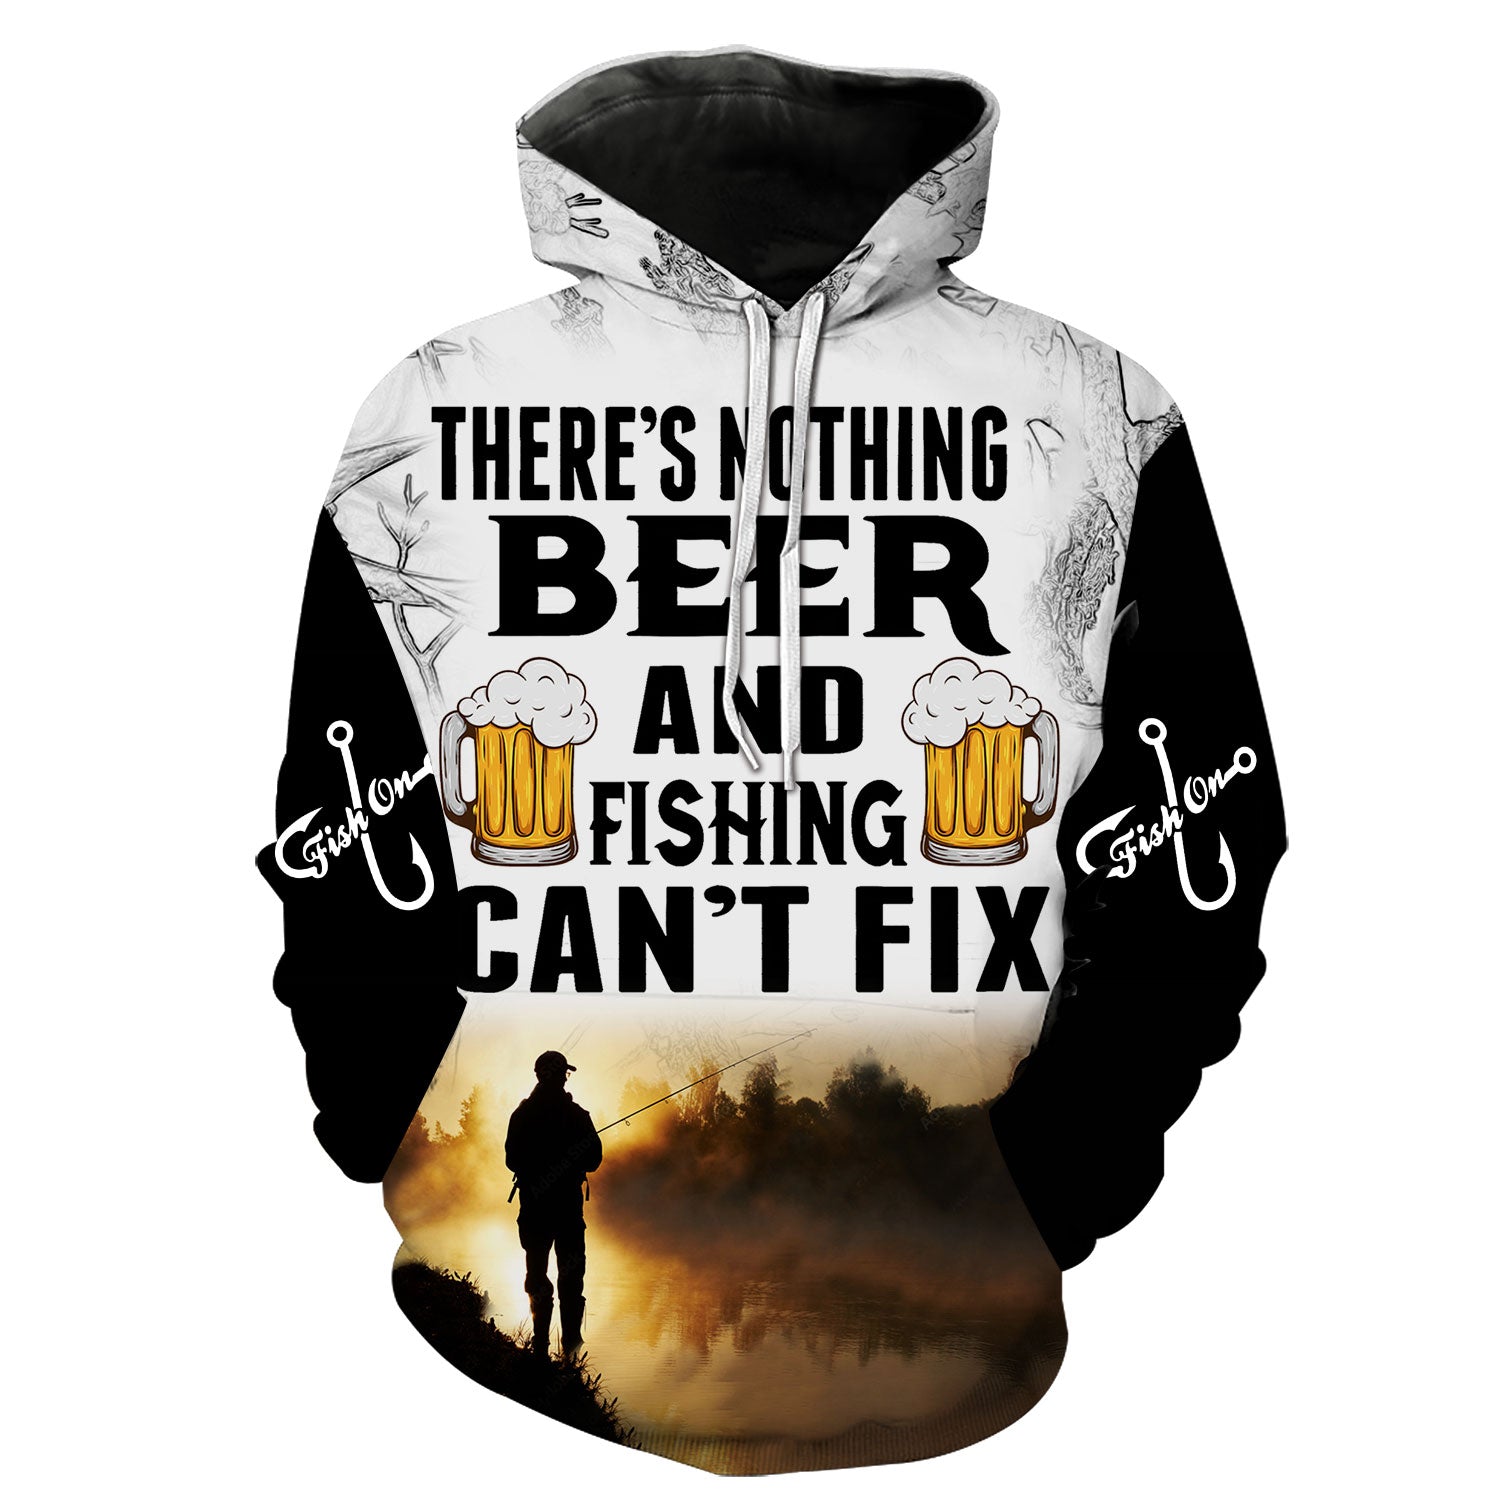 There's nothing beer and fishing can't fix - Hoodie